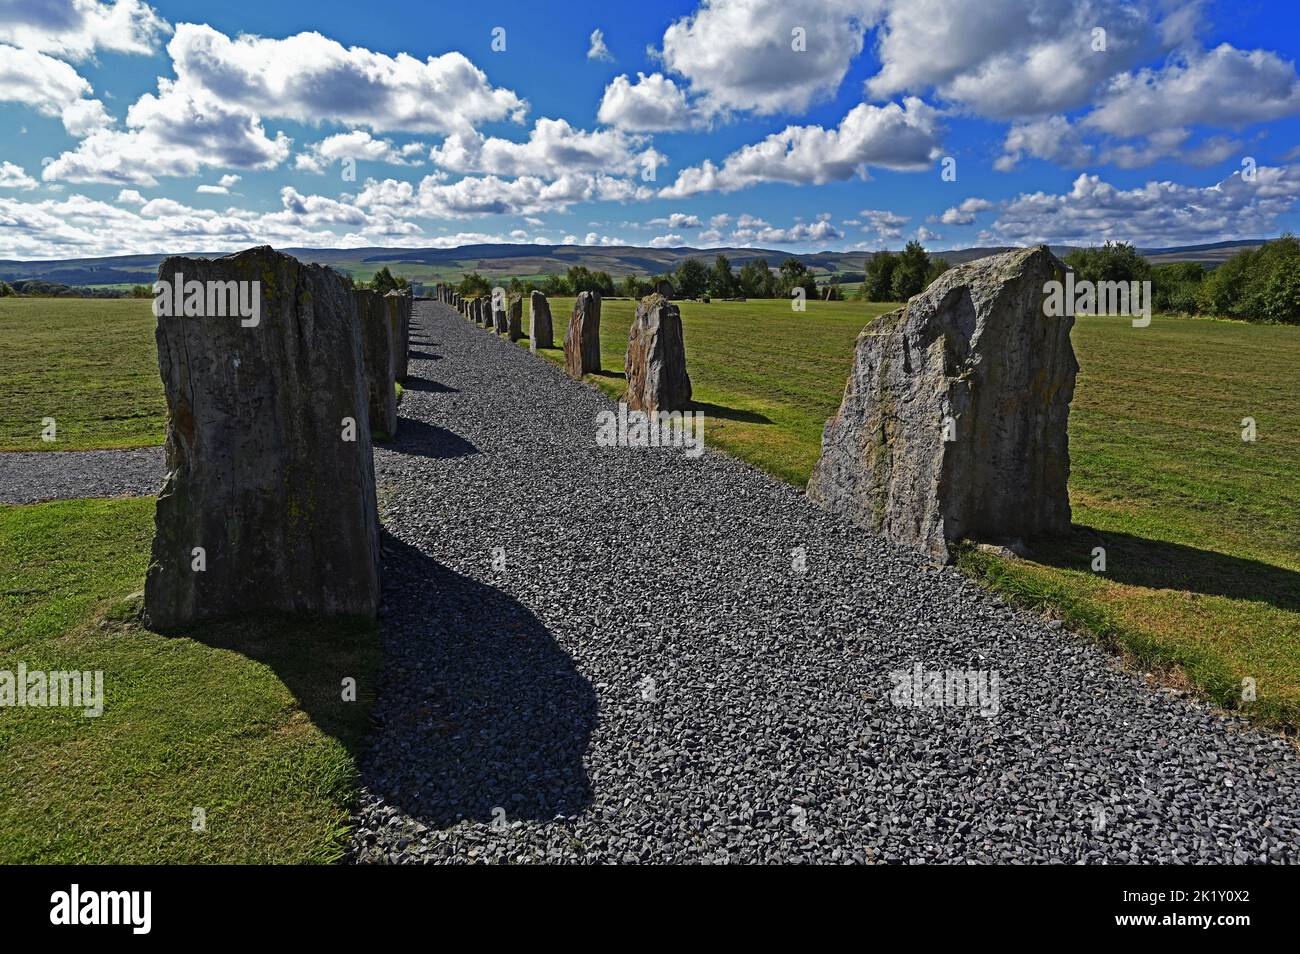 'North-South Line looking South'. Outdoor artwork by Charles Jencks. Crawick Multiverse, Sanquhar, Dumfries and Galloway, Scotland, United Kingdom. Stock Photo